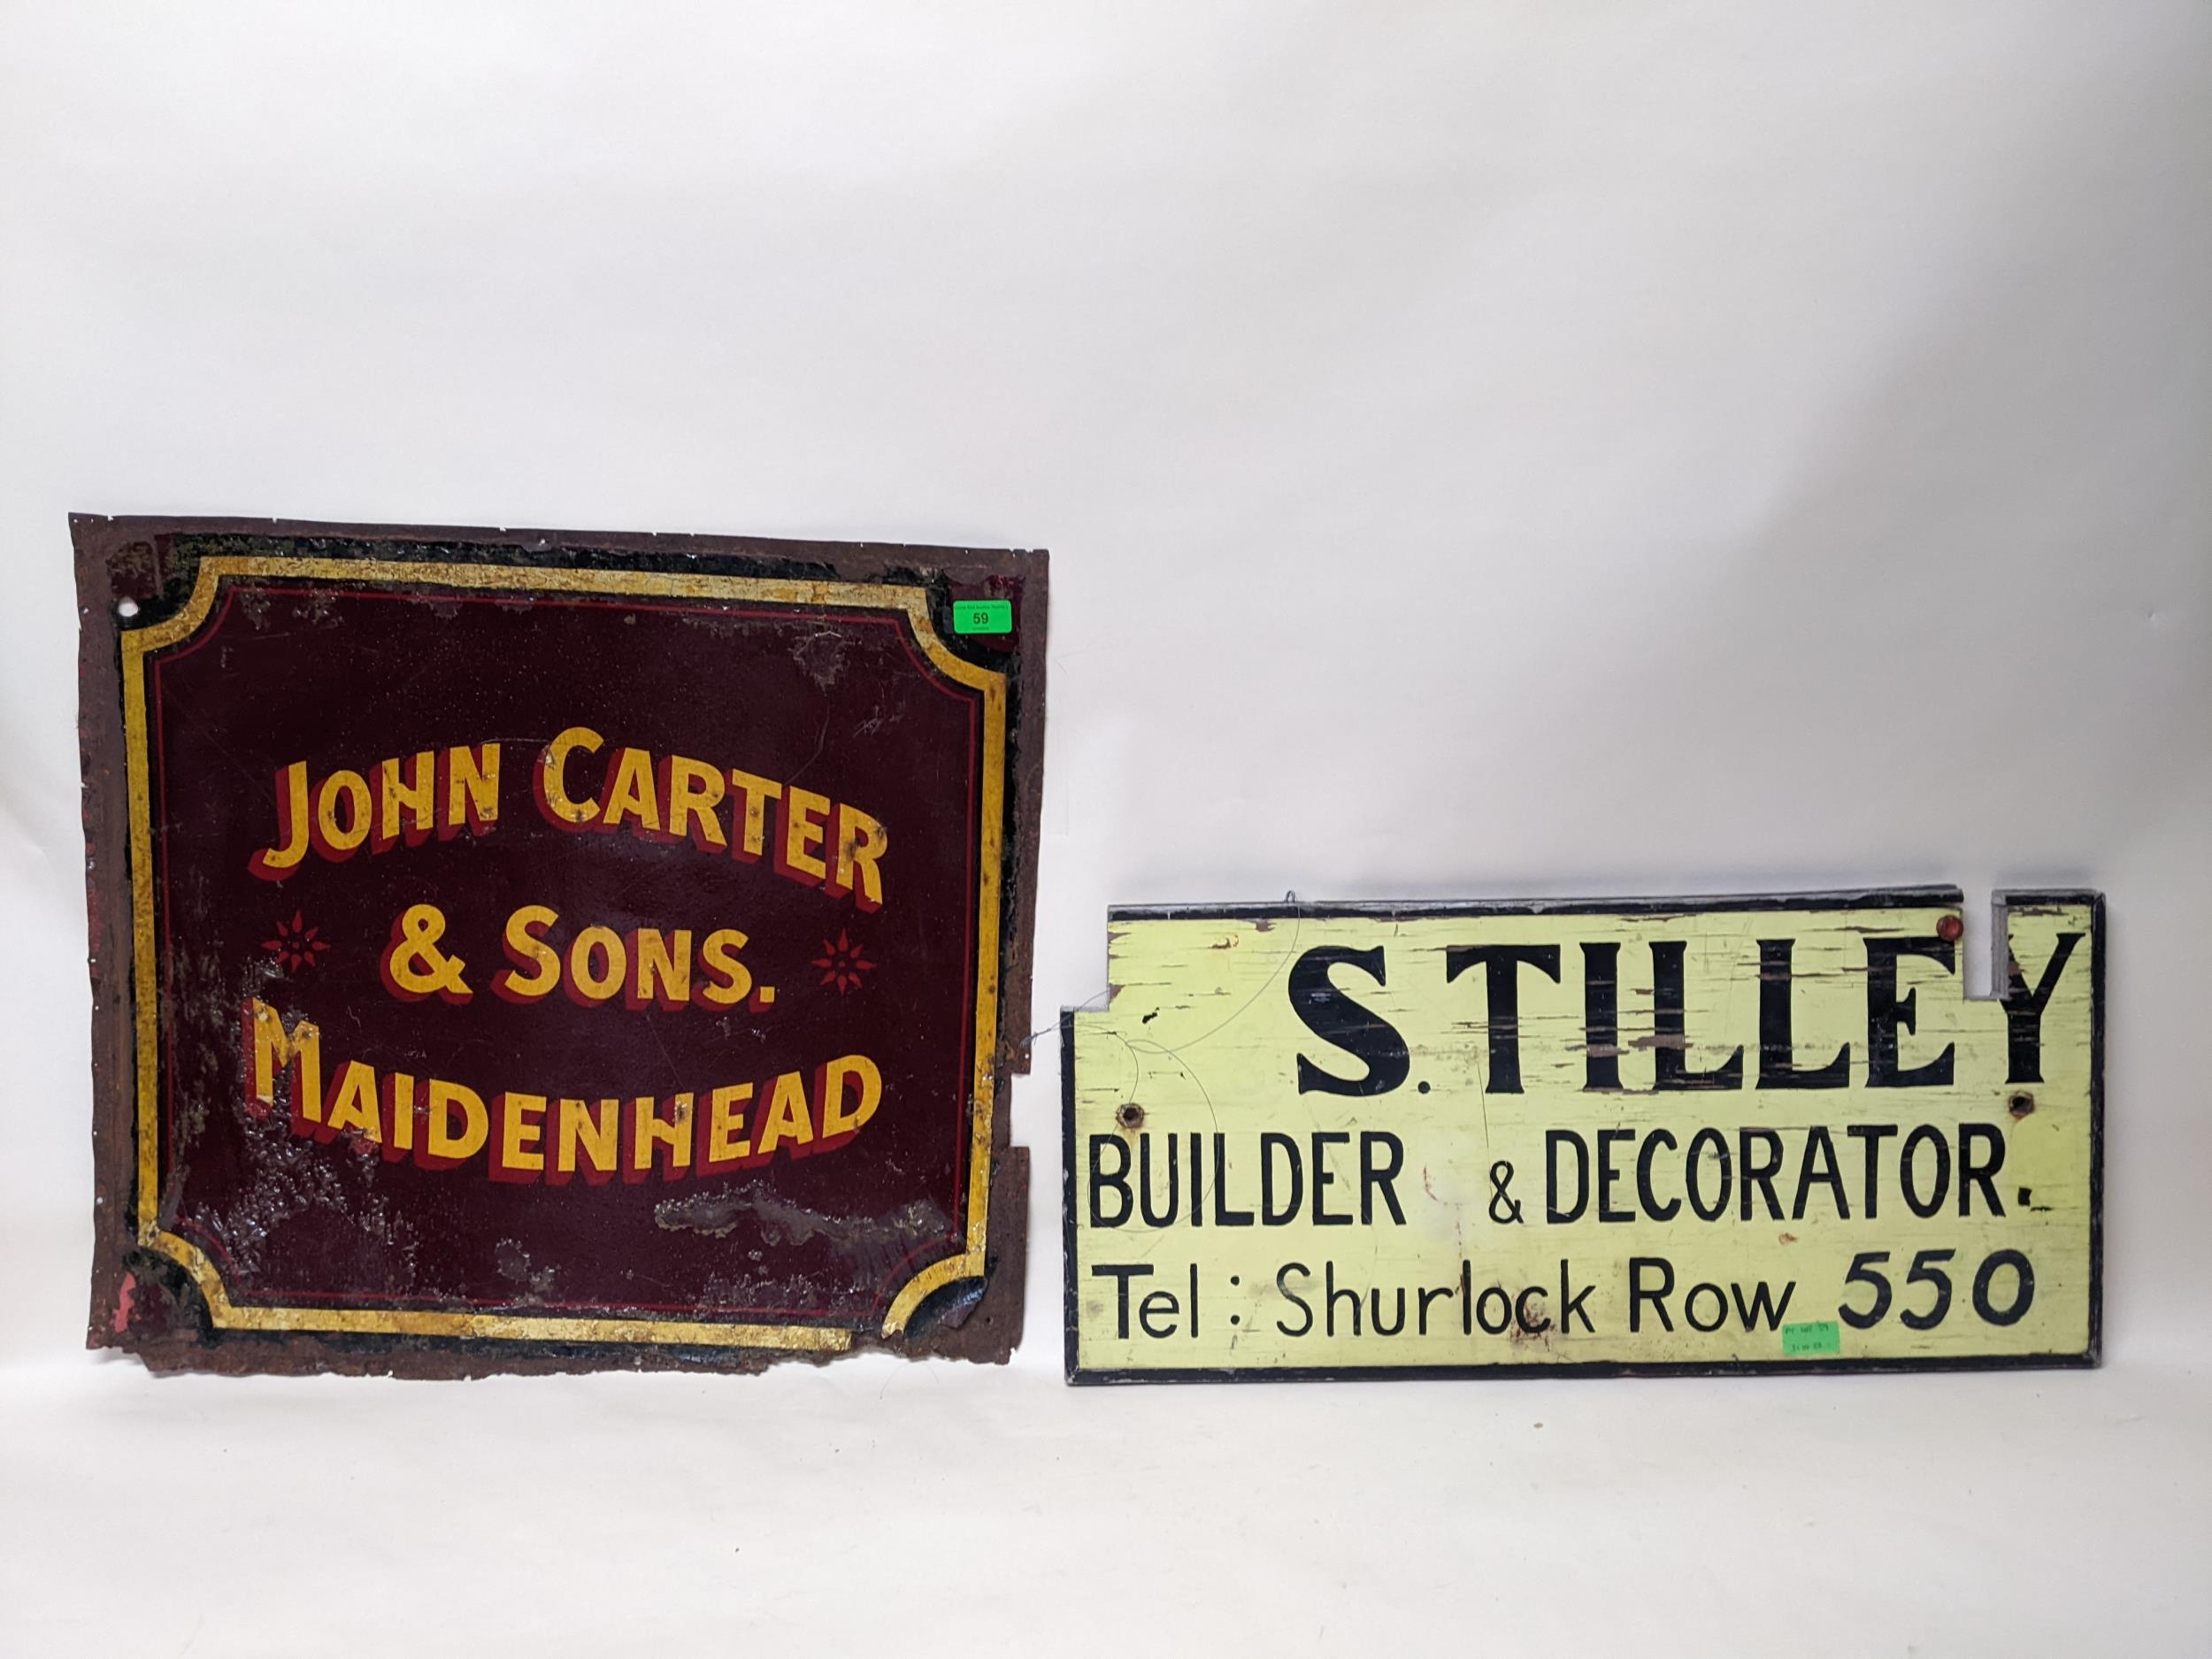 Hand painted tin fairground sign for Carters, Maidenhead plus a vintage hand painted Winkfield Row